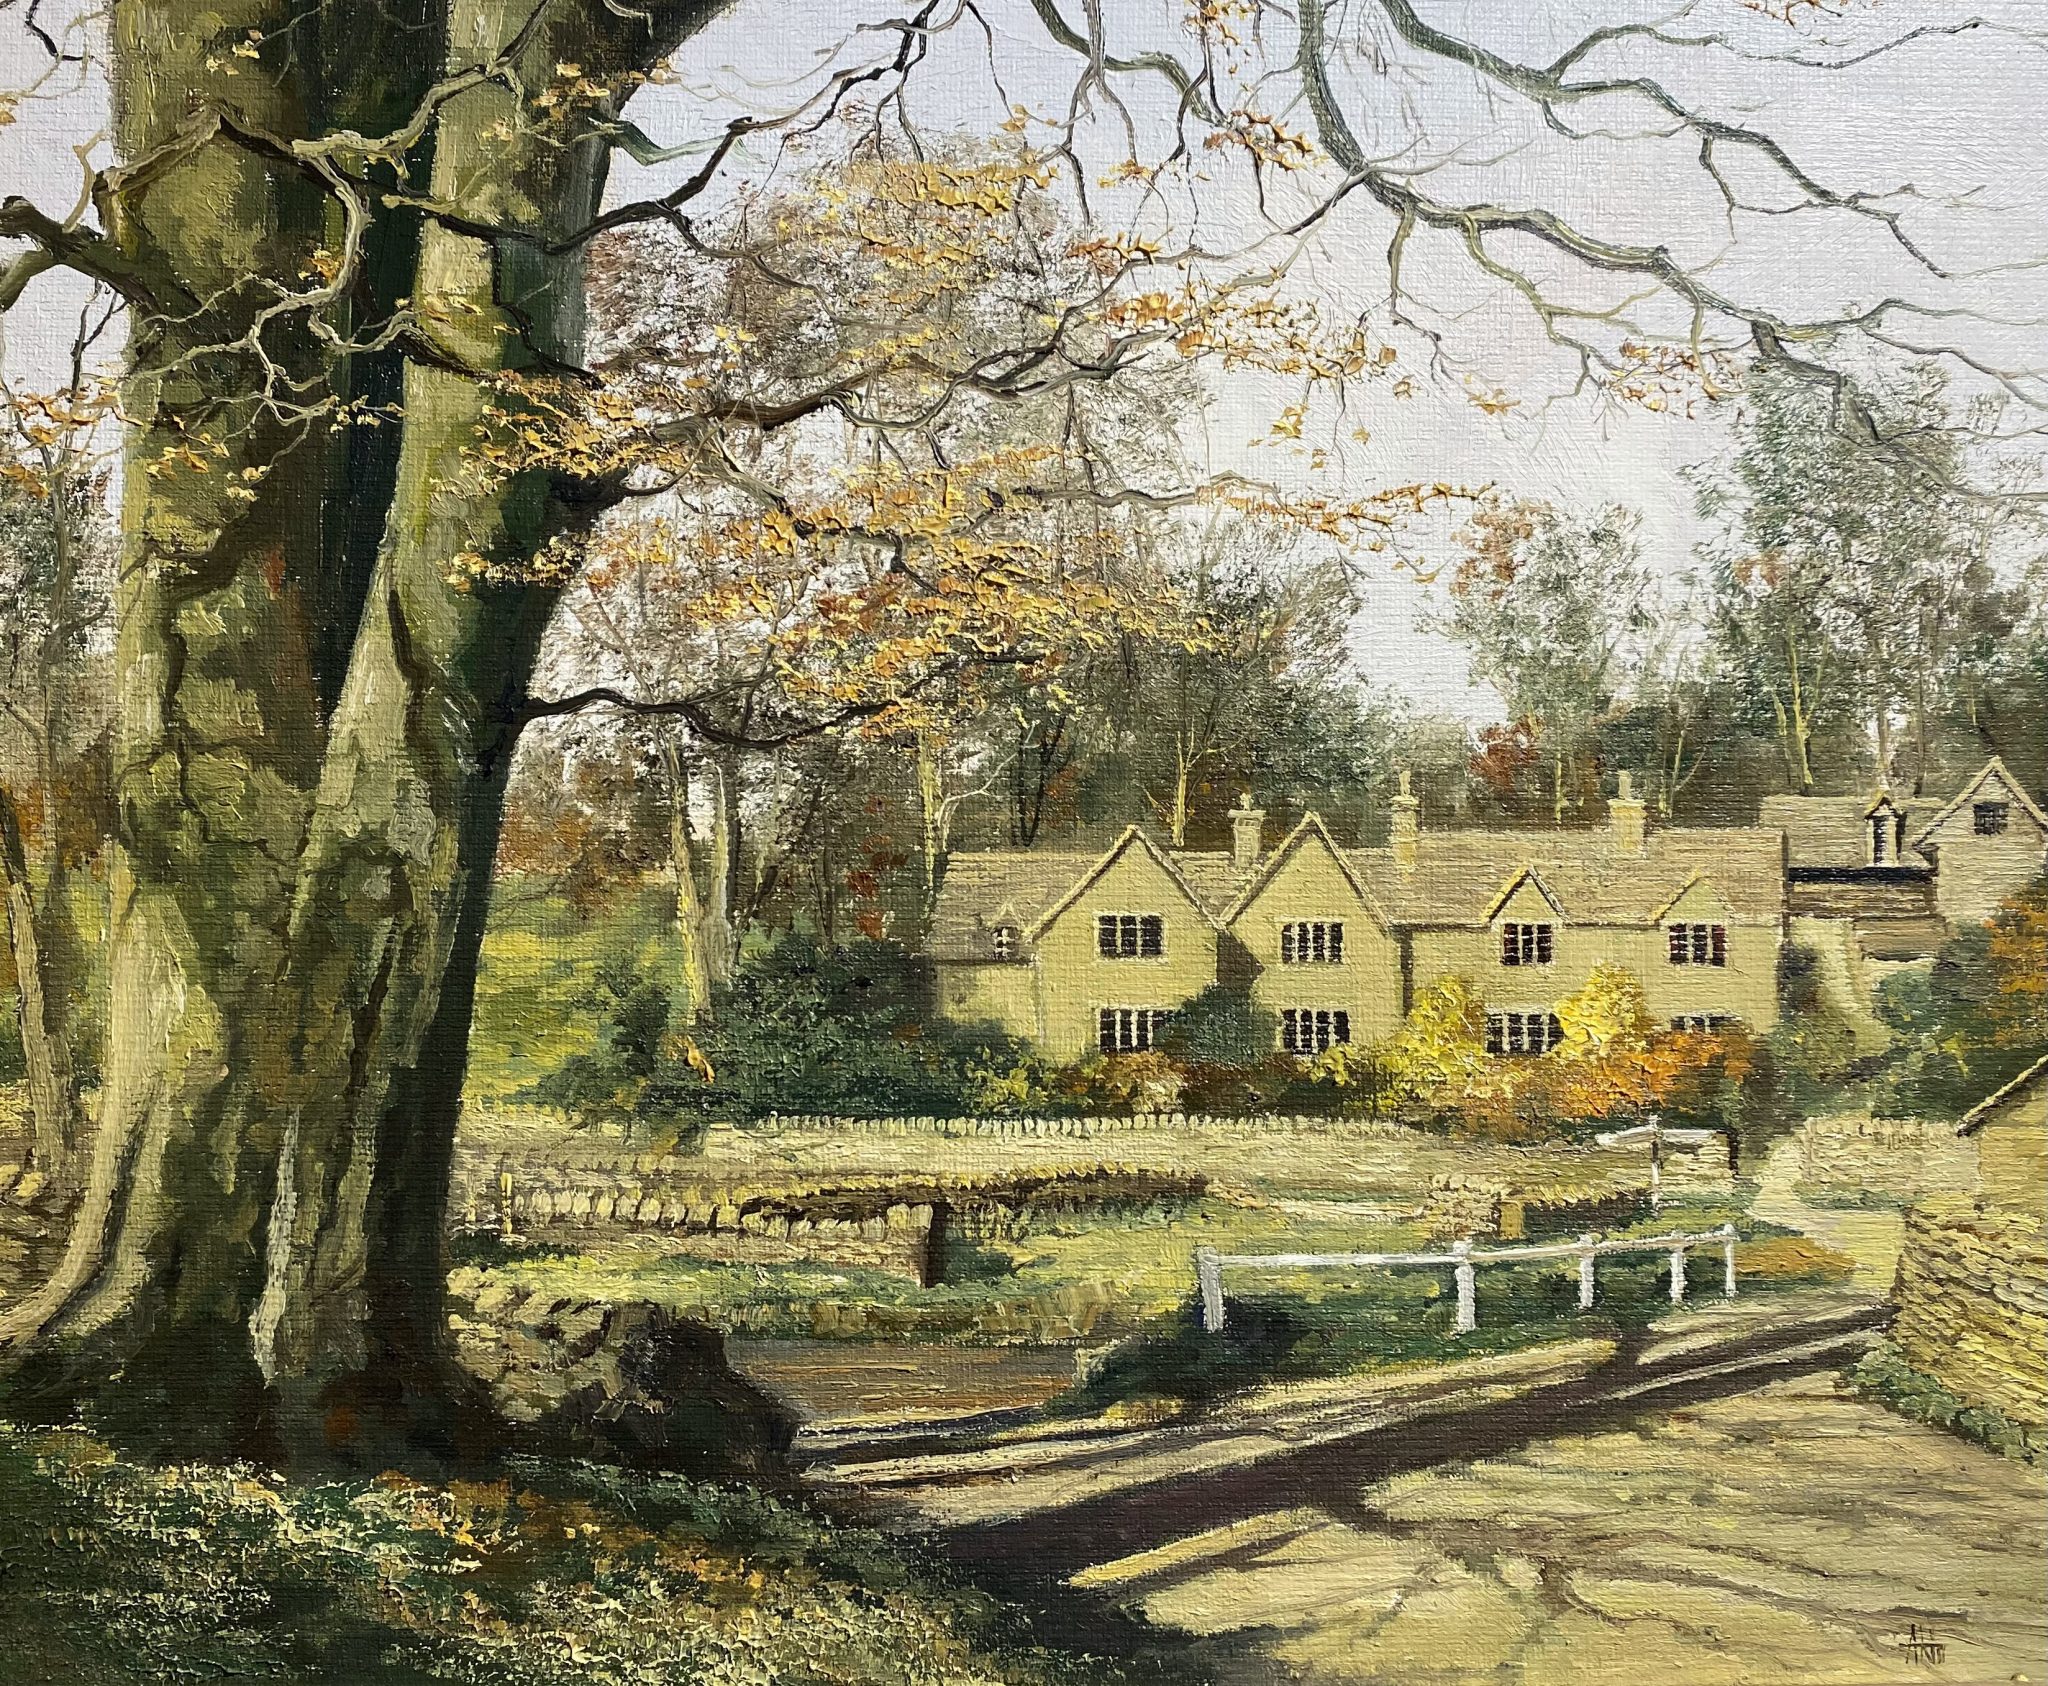 Autumn in the Cotswolds is an original painting by the talented artist Alan King